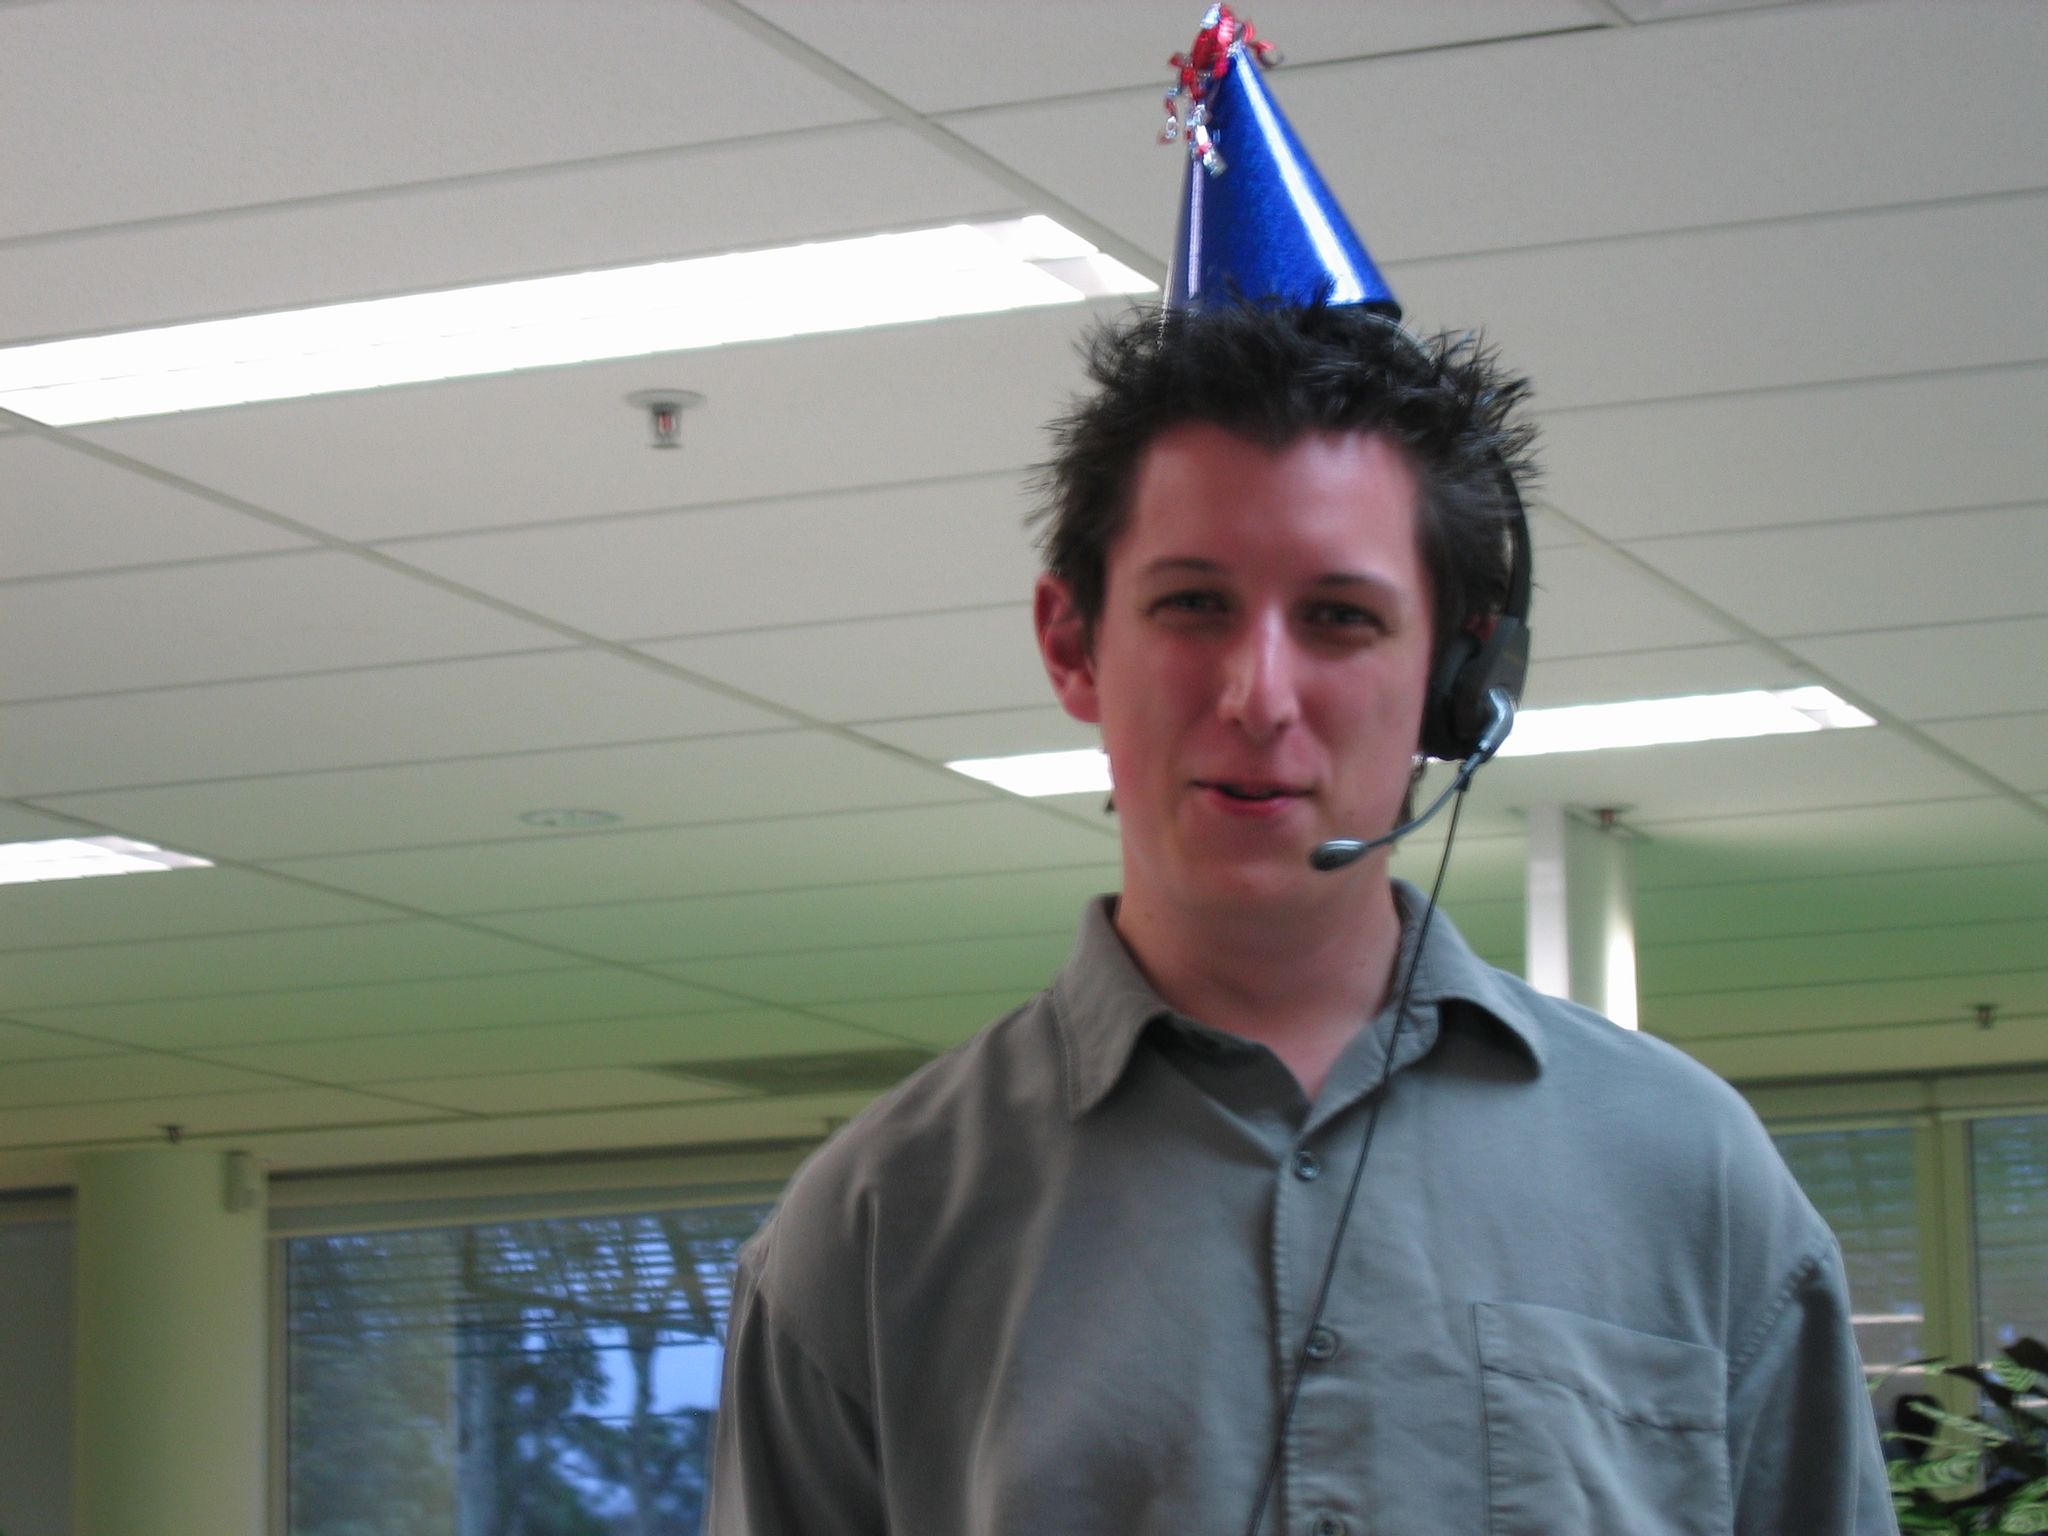 A photo of a clean-shaven white man in a khaki-coloured collared shirt wearing a call centre headset and a conical party hat.